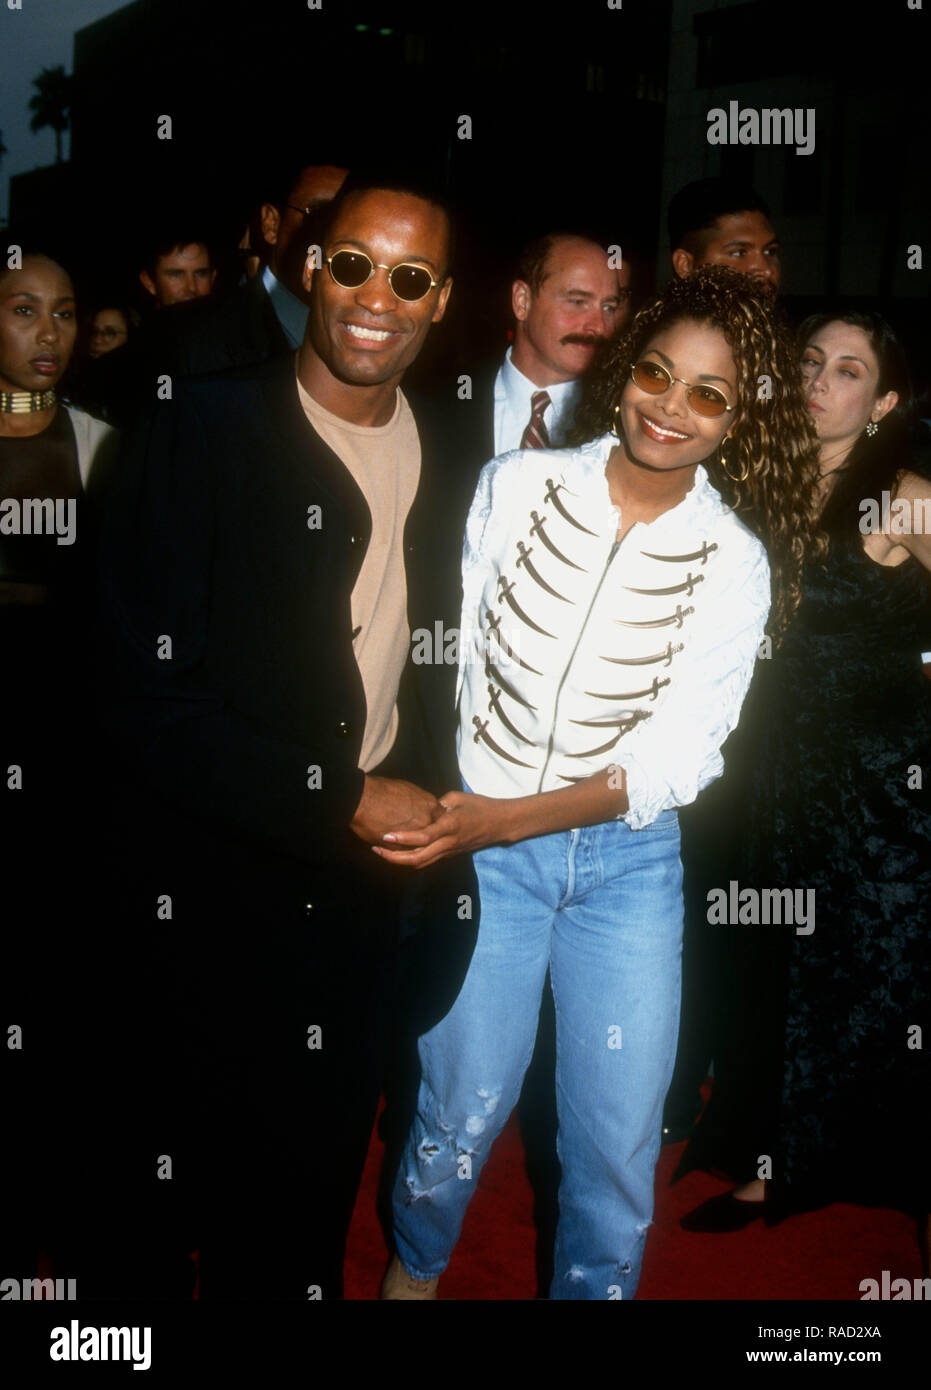 BEVERLY HILLS, CA - JULY 21: Director/writer/producer John Singleton and singer Janet Jackson attend Columbia Pictures' 'Poetic Justice' Premiere on July 21, 1993 at the Samuel Goldwyn Theatre in Beverly Hills, California. Photo by Barry King/Alamy Stock Photo Stock Photo